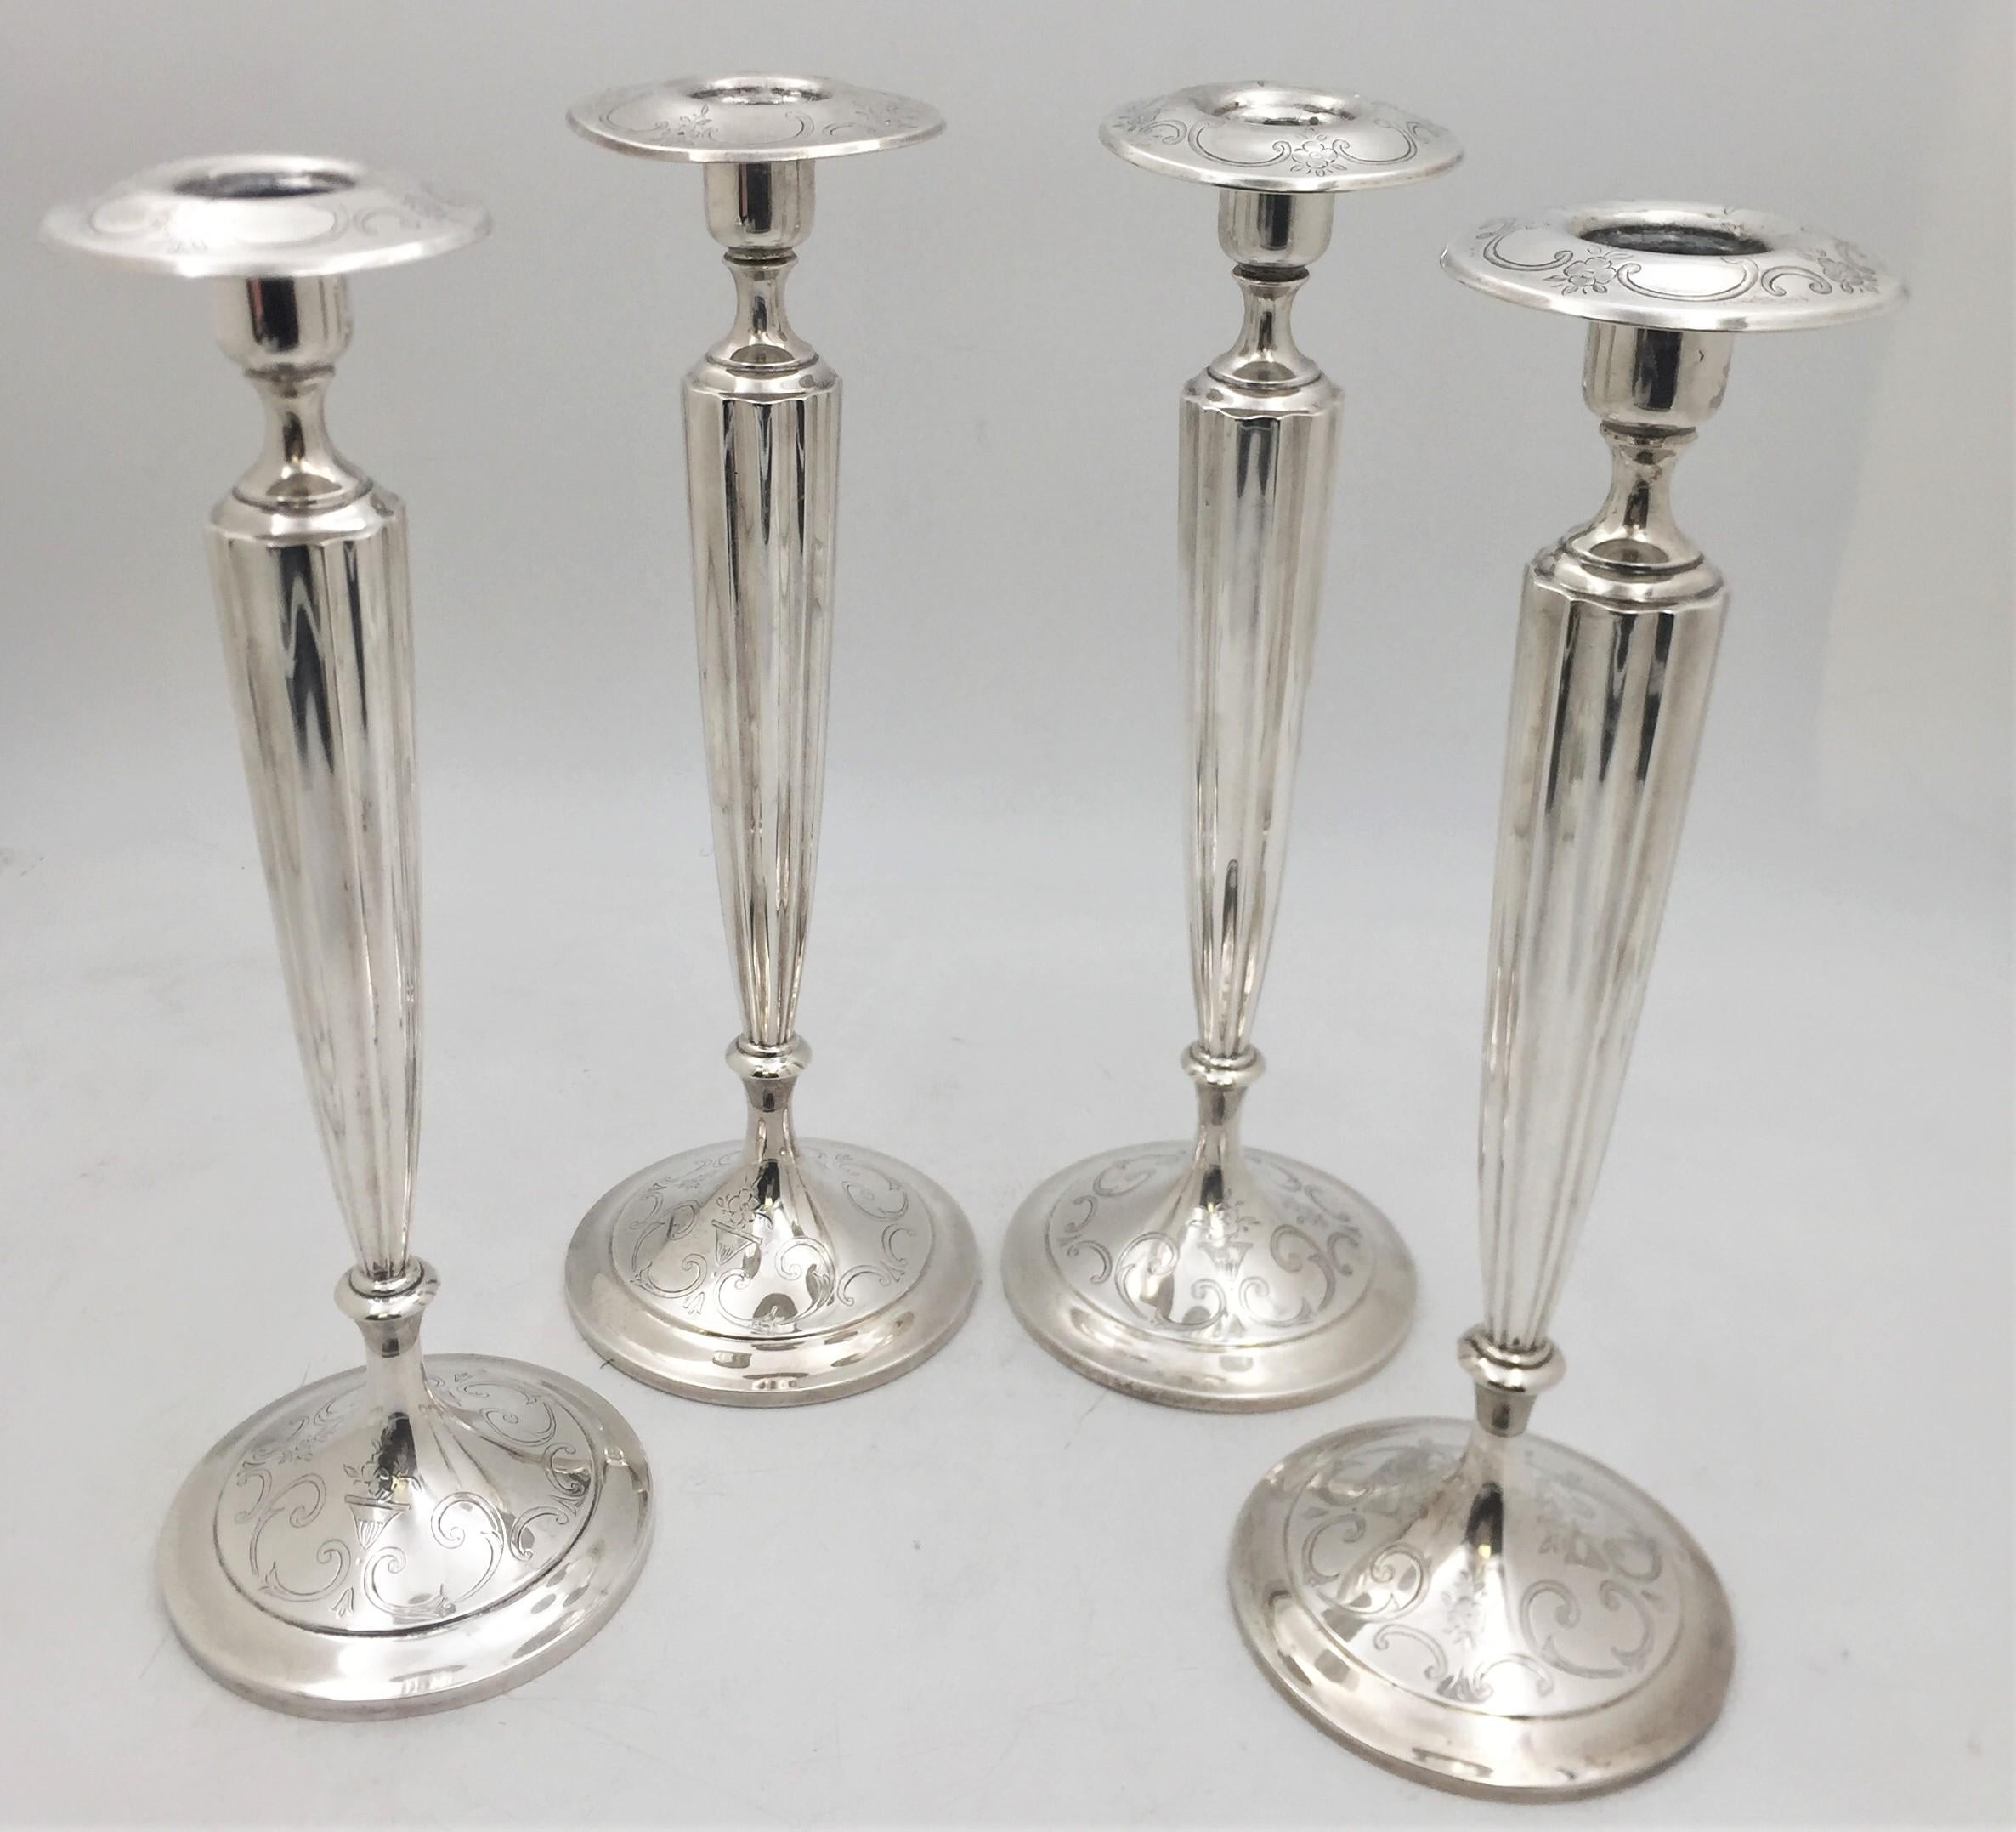 Shreve & Co., sterling silver set of 4 candlesticks from the 20th century, with fluted stems. The rims and bases display floral motifs between elegant swirling designs. Each measures 12 1/3'' in height by 4 1/4'' in diameter at the base, is